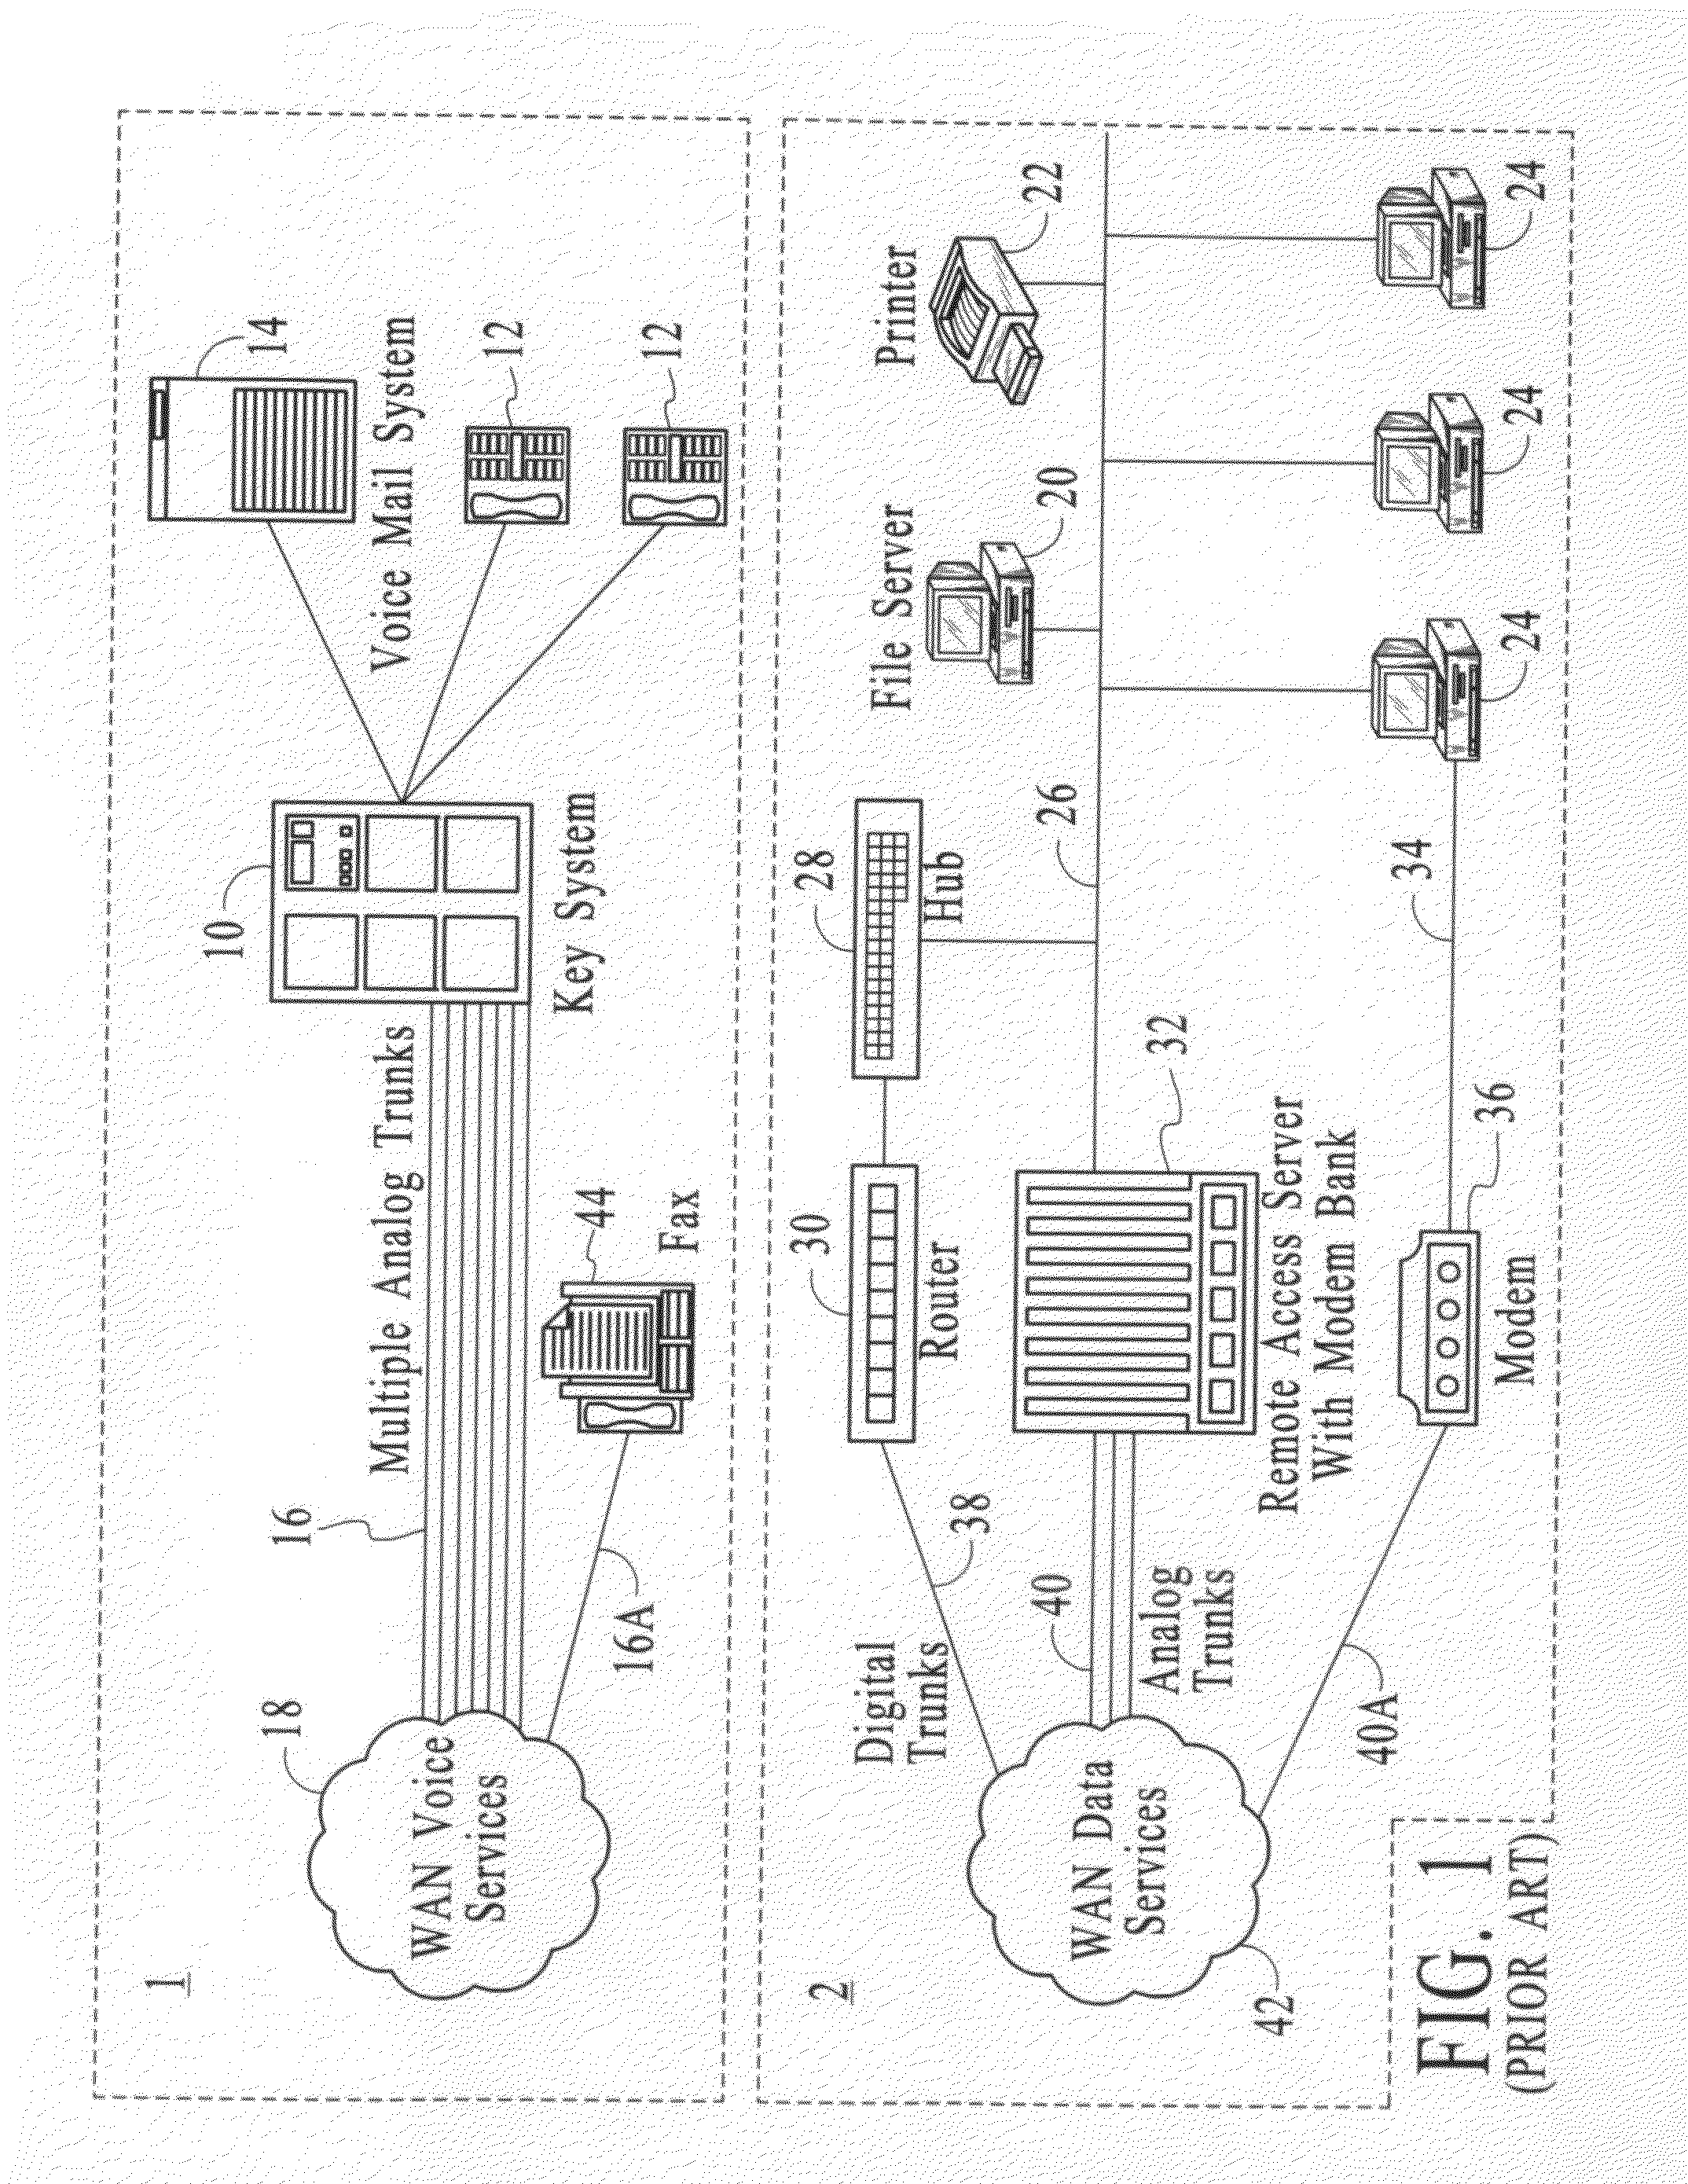 Systems and methods for voice and data communications including a scalable TDM switch/multiplexer